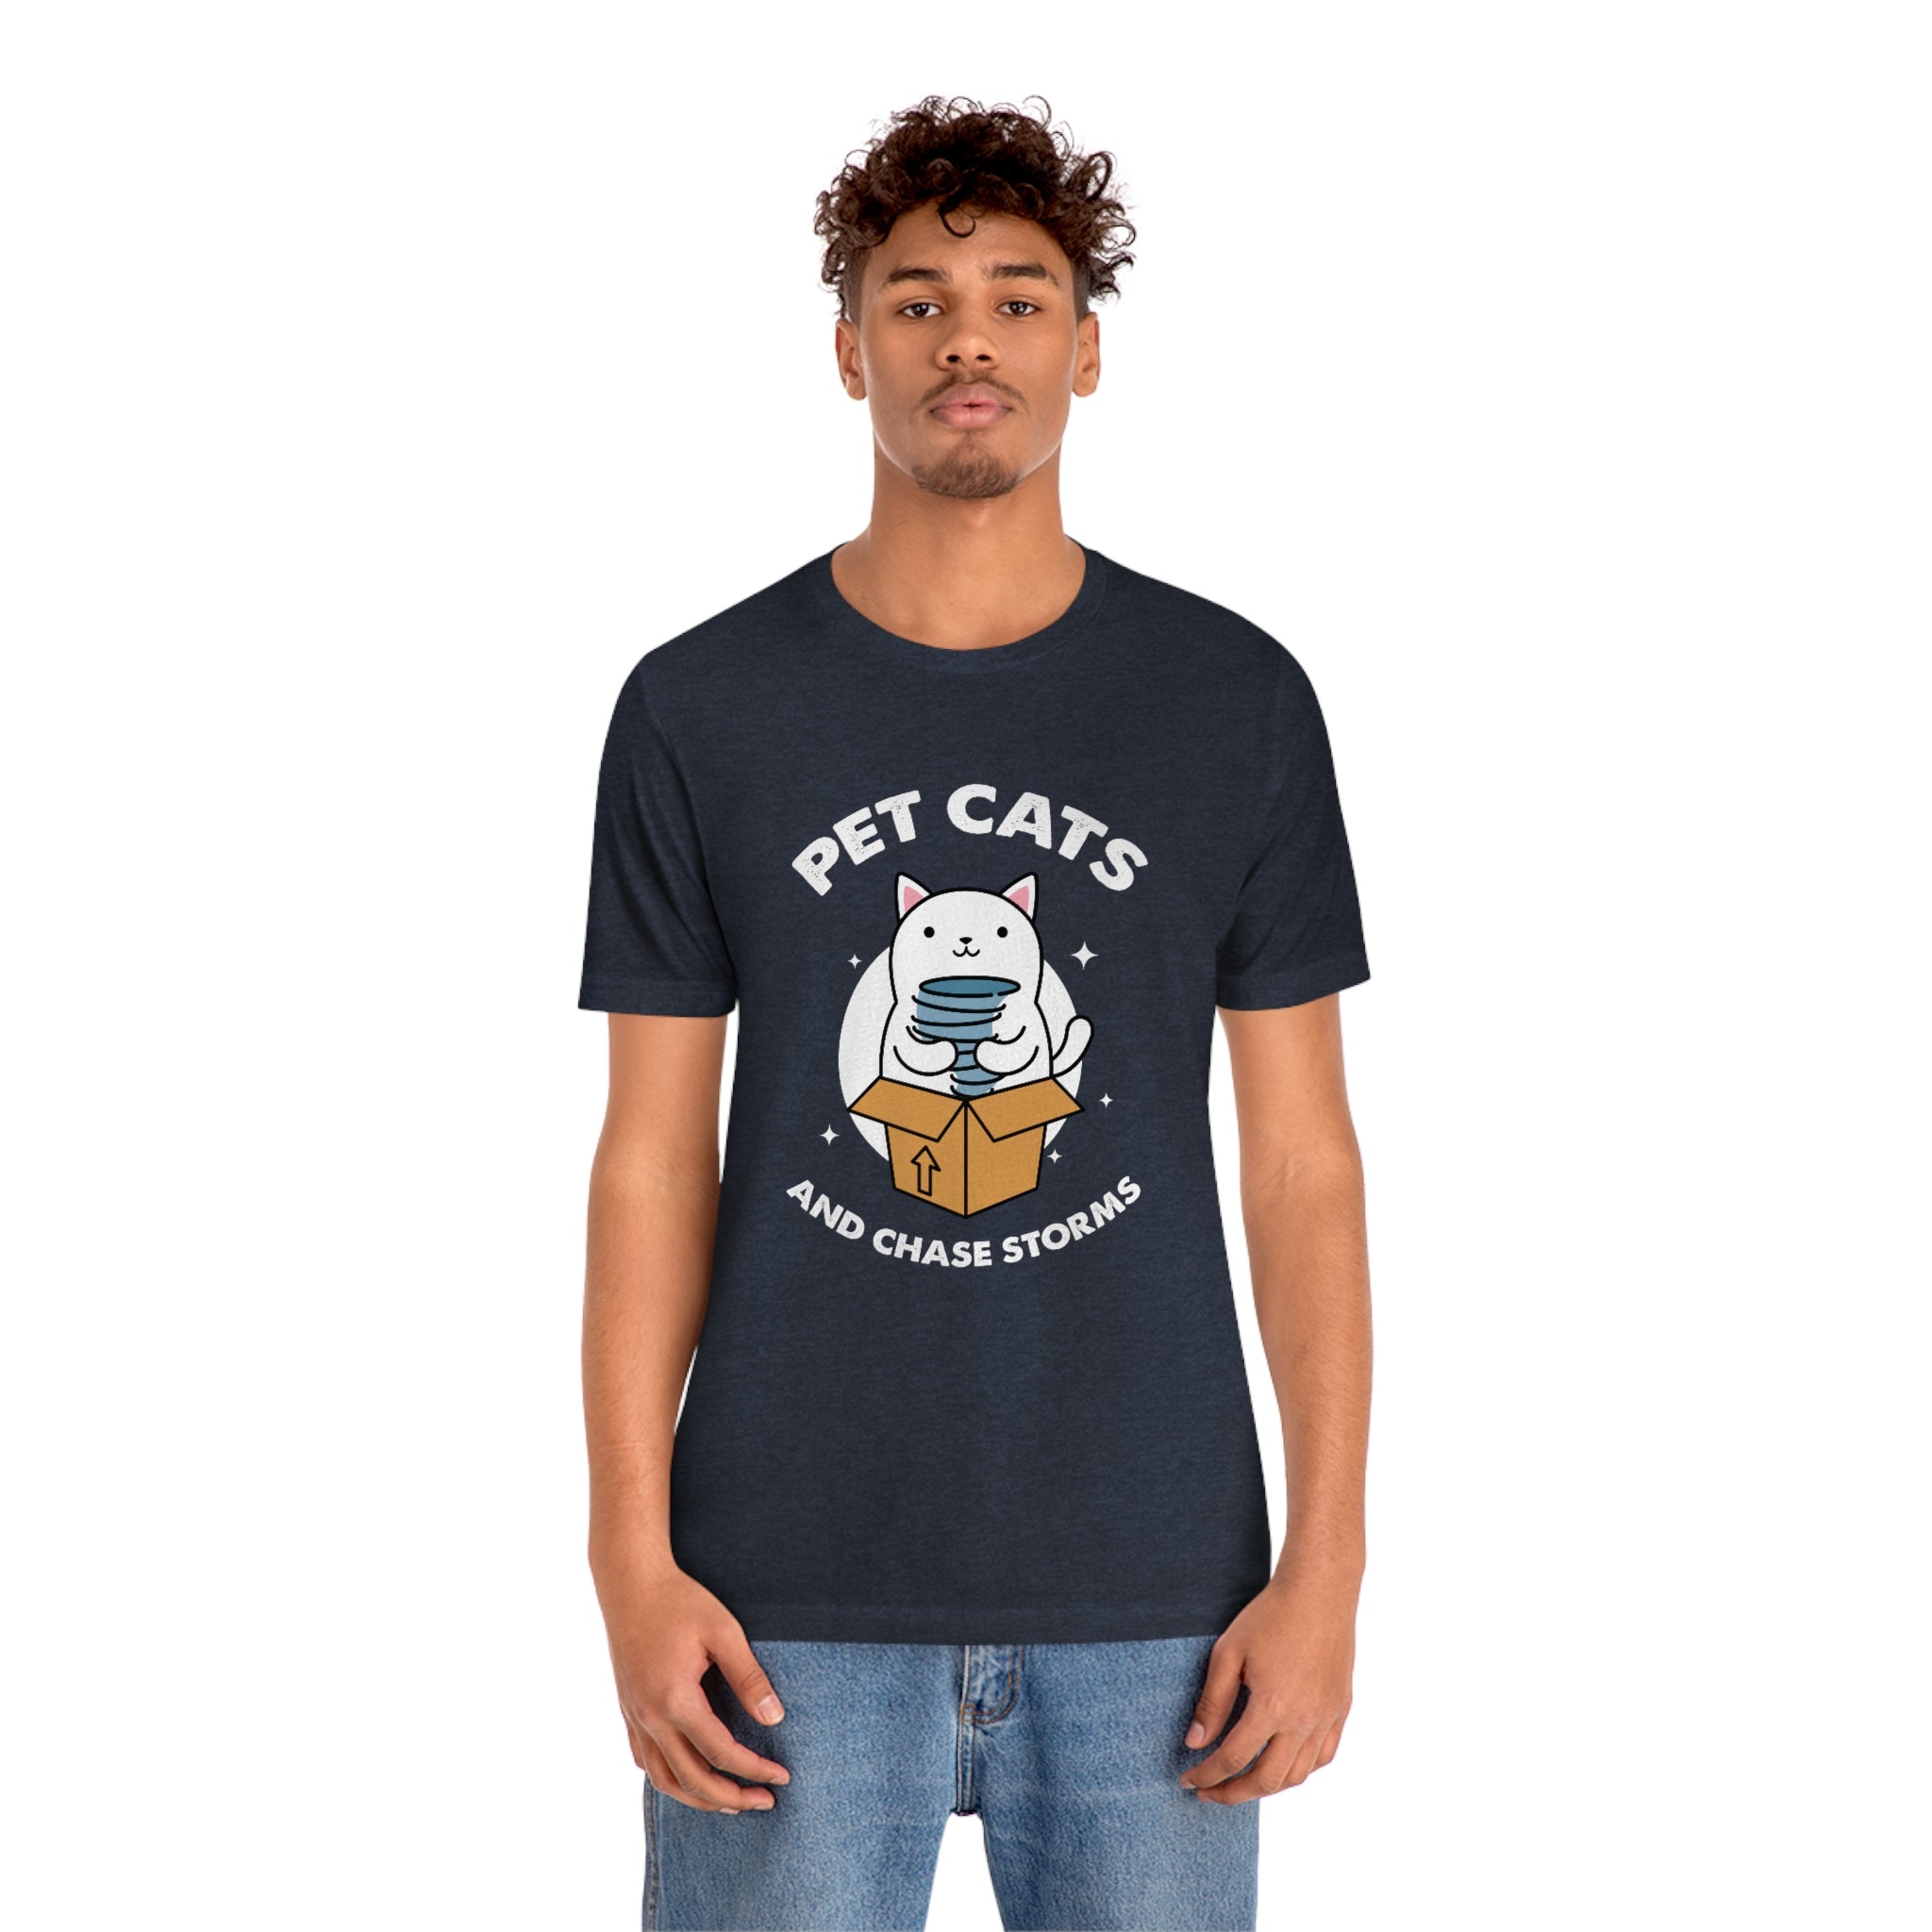 Pet Cats and Chase Storms Tee 